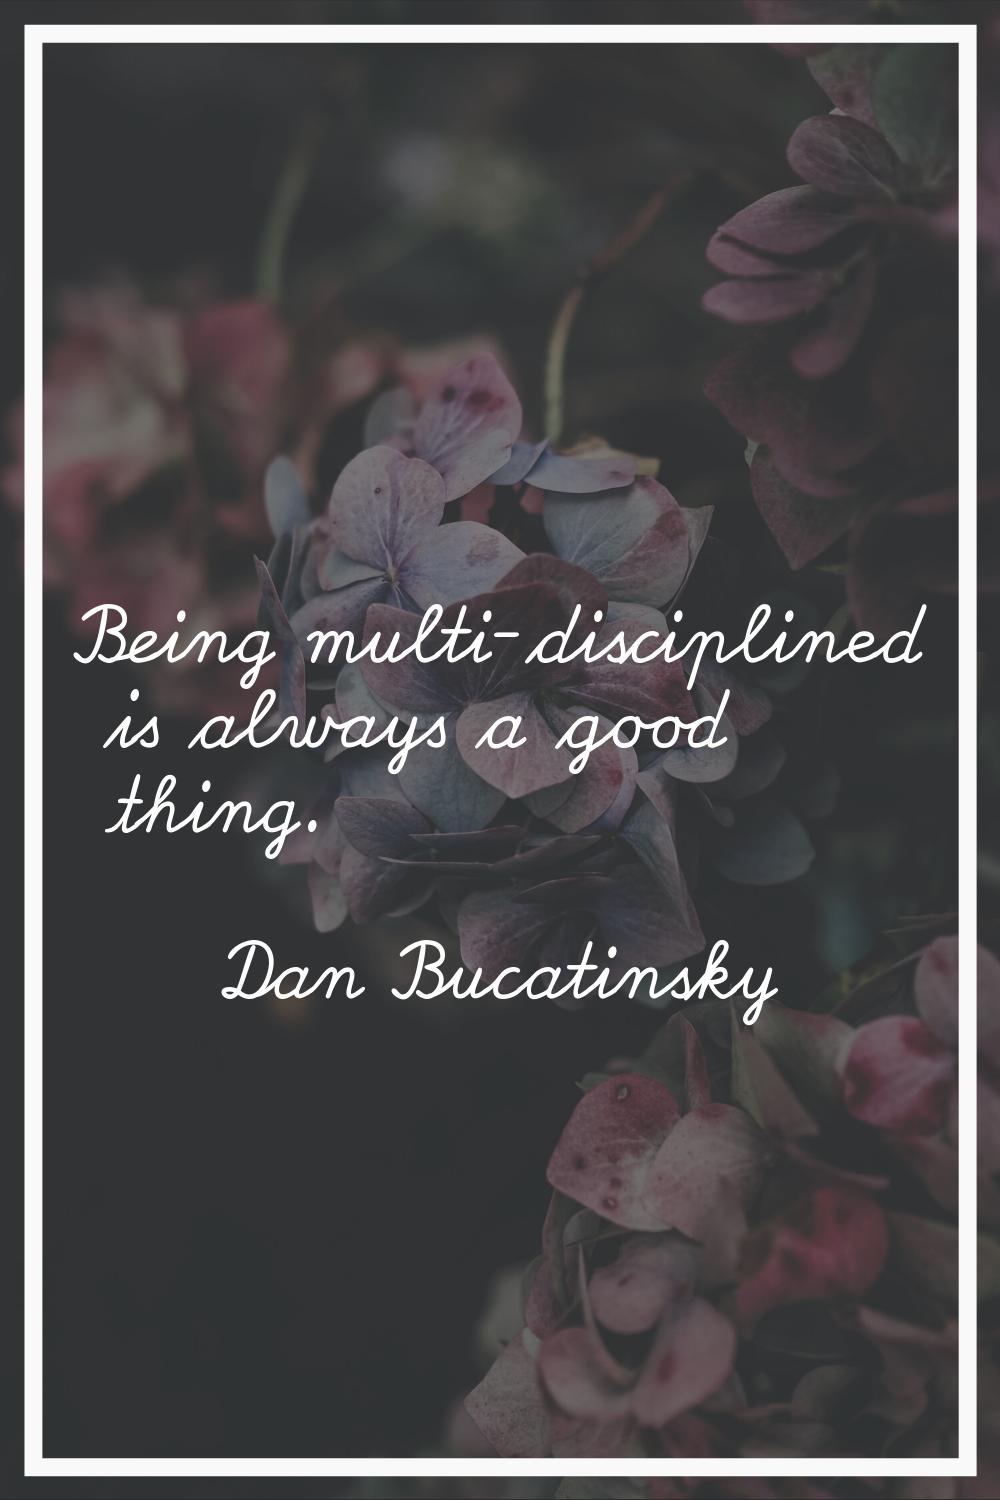 Being multi-disciplined is always a good thing.